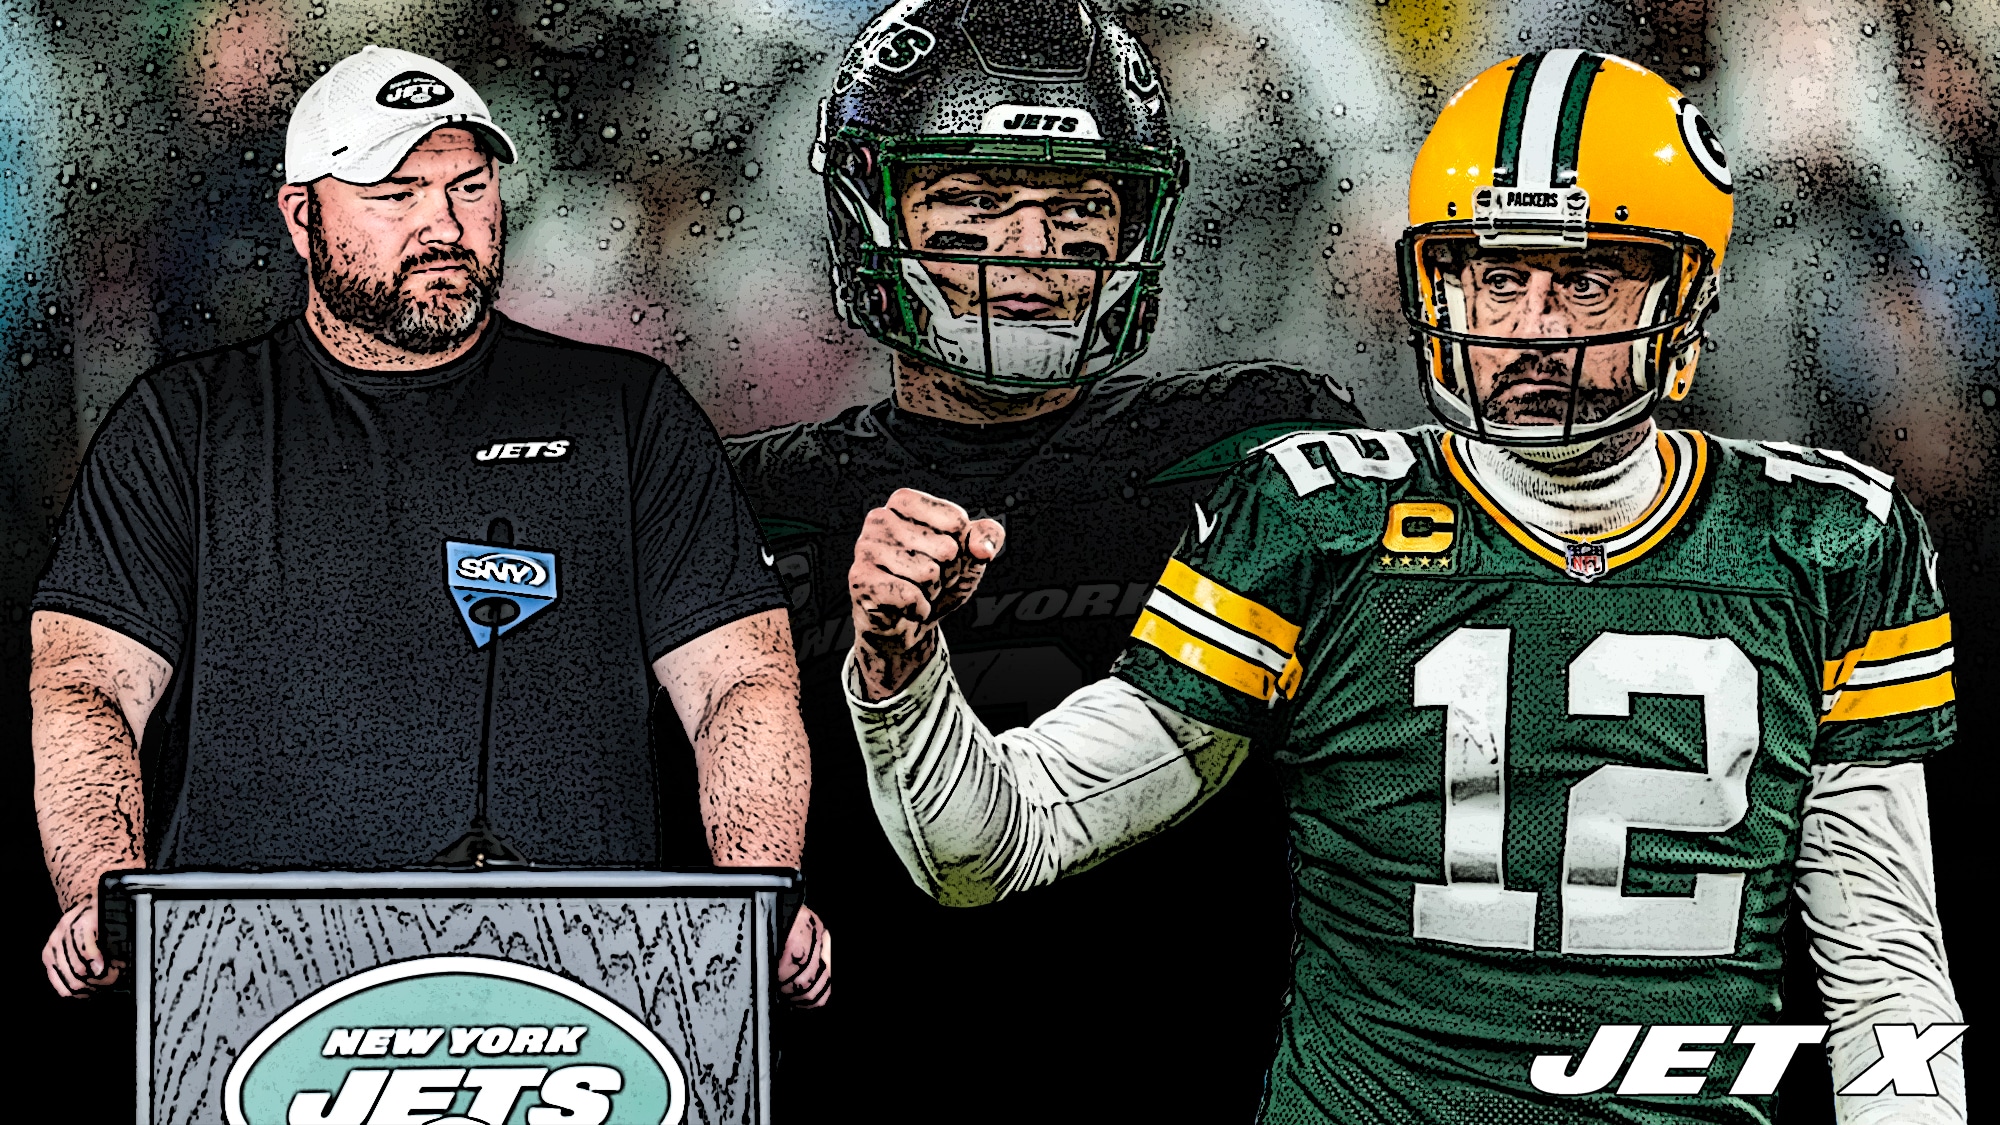 Cowboys set for Jets, apparently without Rodgers